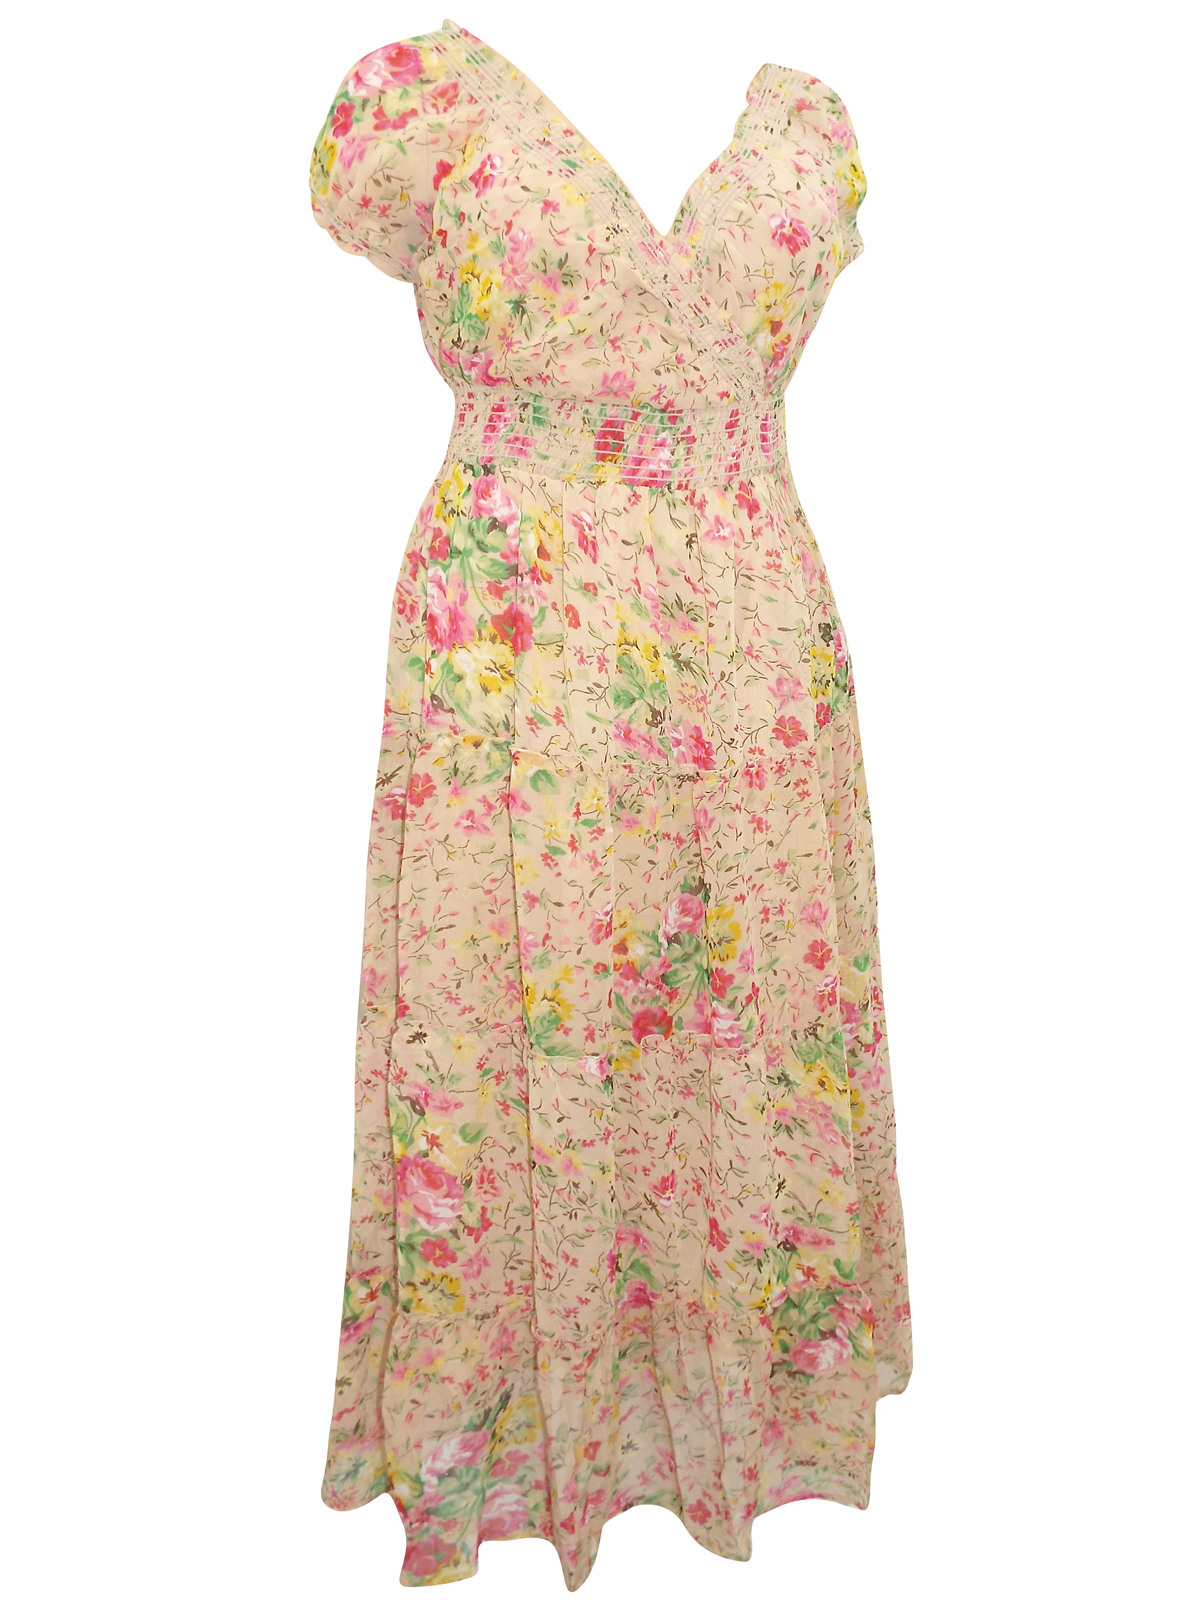 Donna Claire - - DonnaClaire STONE Floral Print Smocked Waist Long